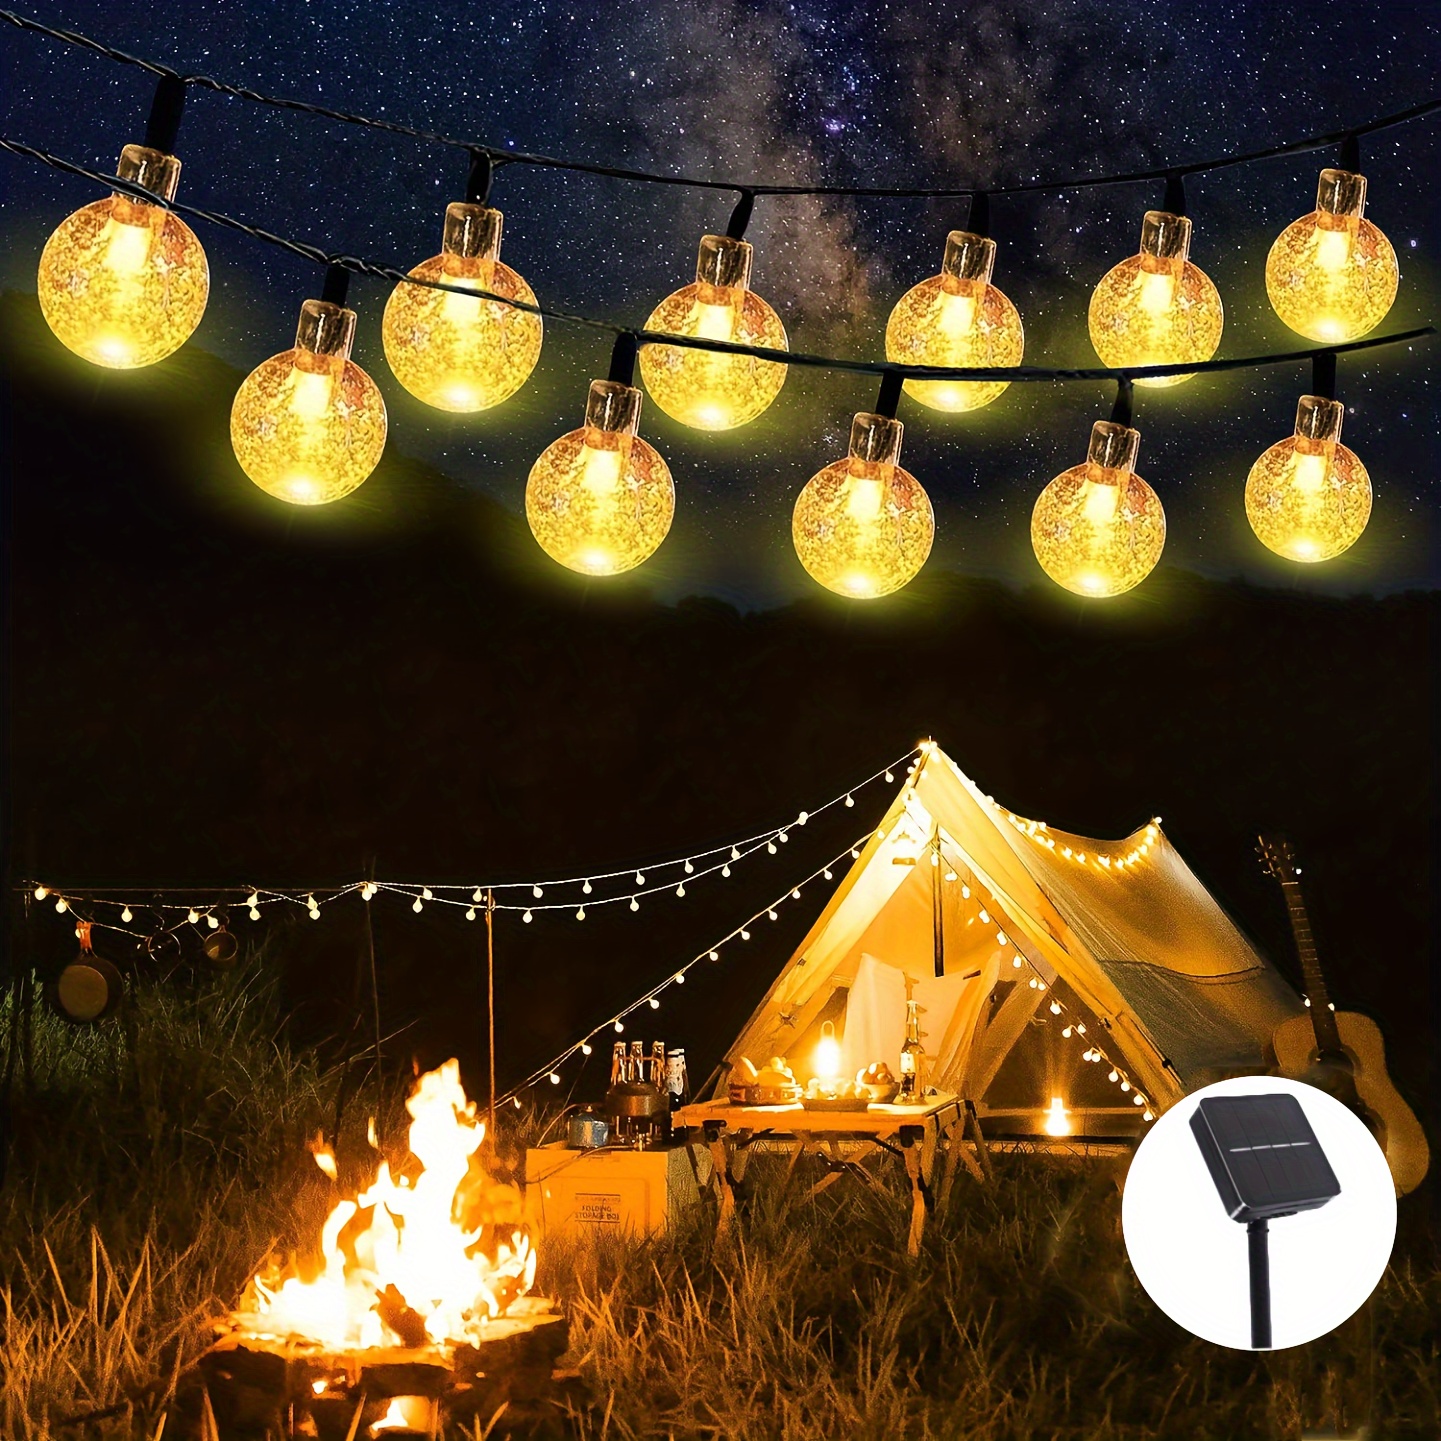 

Solar-powered Outdoor Led Globe String Lights, White Non-changing Color, Plastic Material, Hanging Mount, Solar Battery Charged, No Remote Control Included.